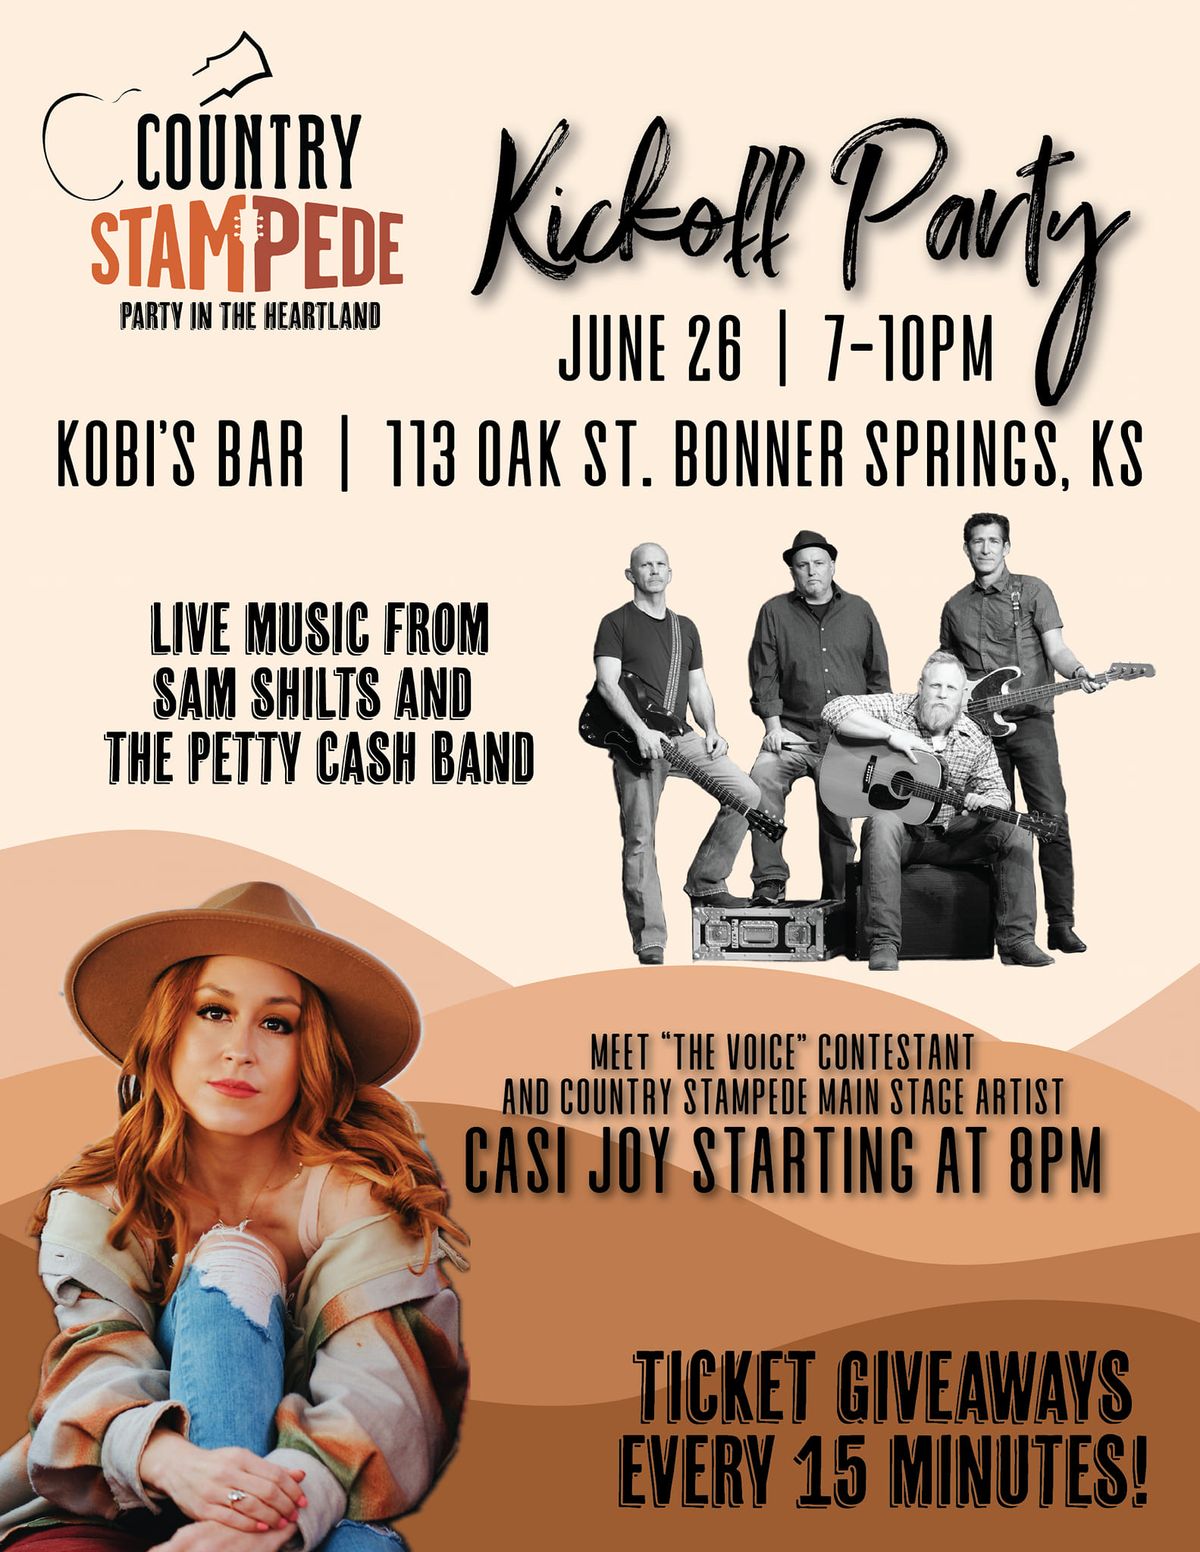 Country Stampede Kickoff Party